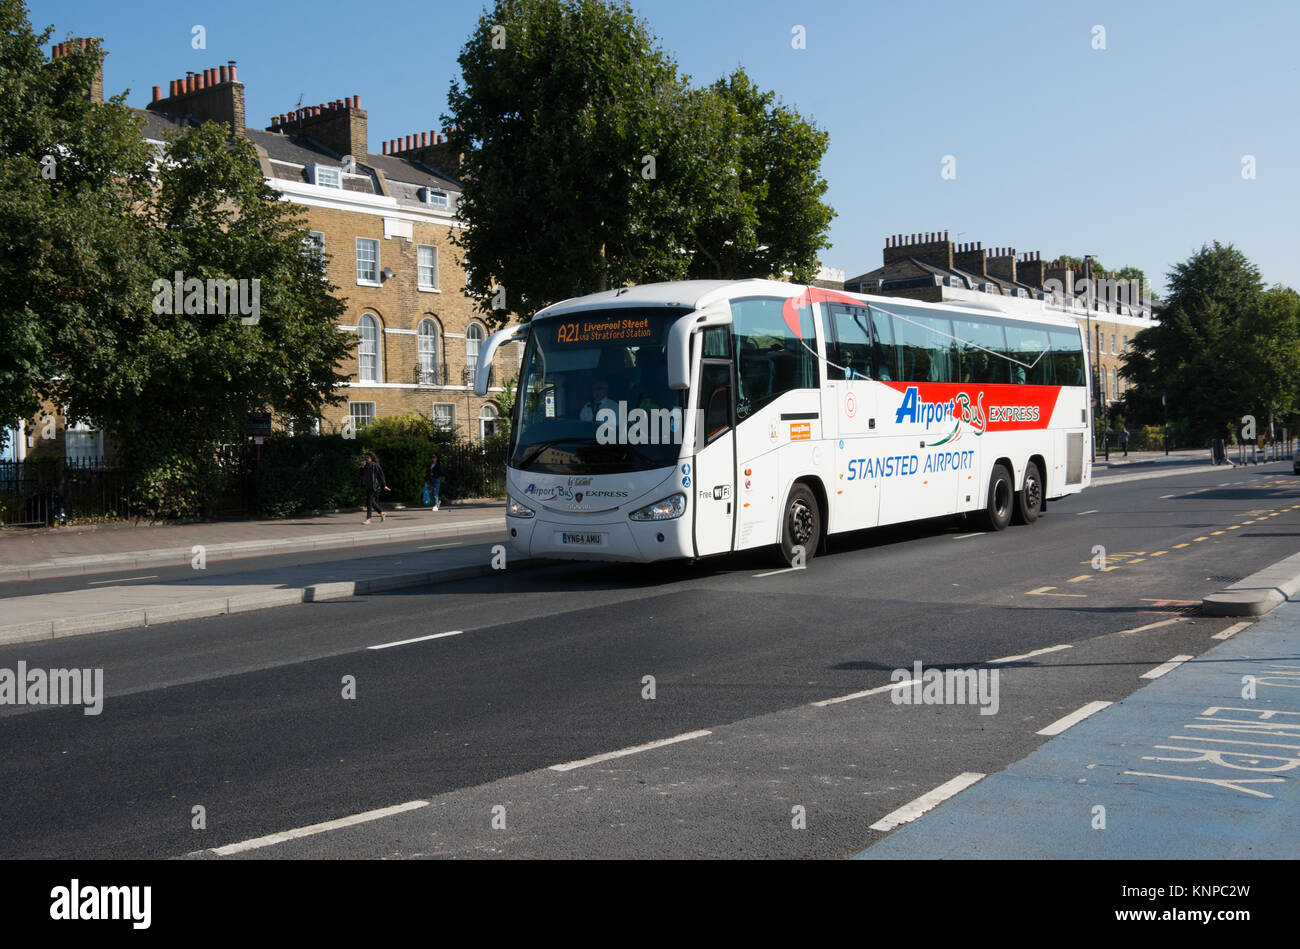 An Airport Bus Express travels towards central London after calling at  Stratford on its journey from Stanstead Airport Stock Photo - Alamy